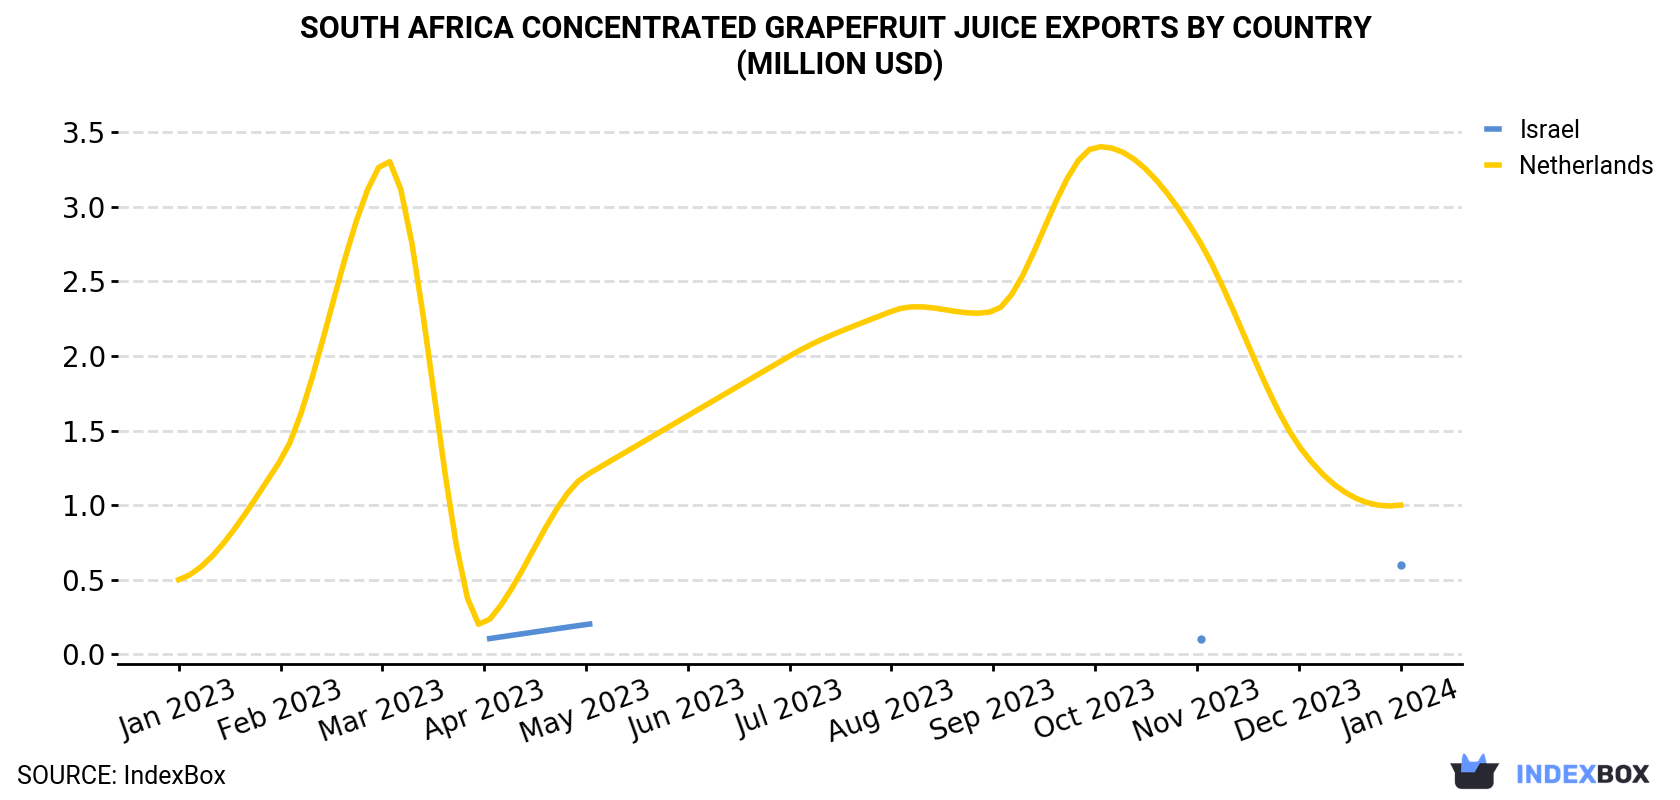 South Africa Concentrated Grapefruit Juice Exports By Country (Million USD)